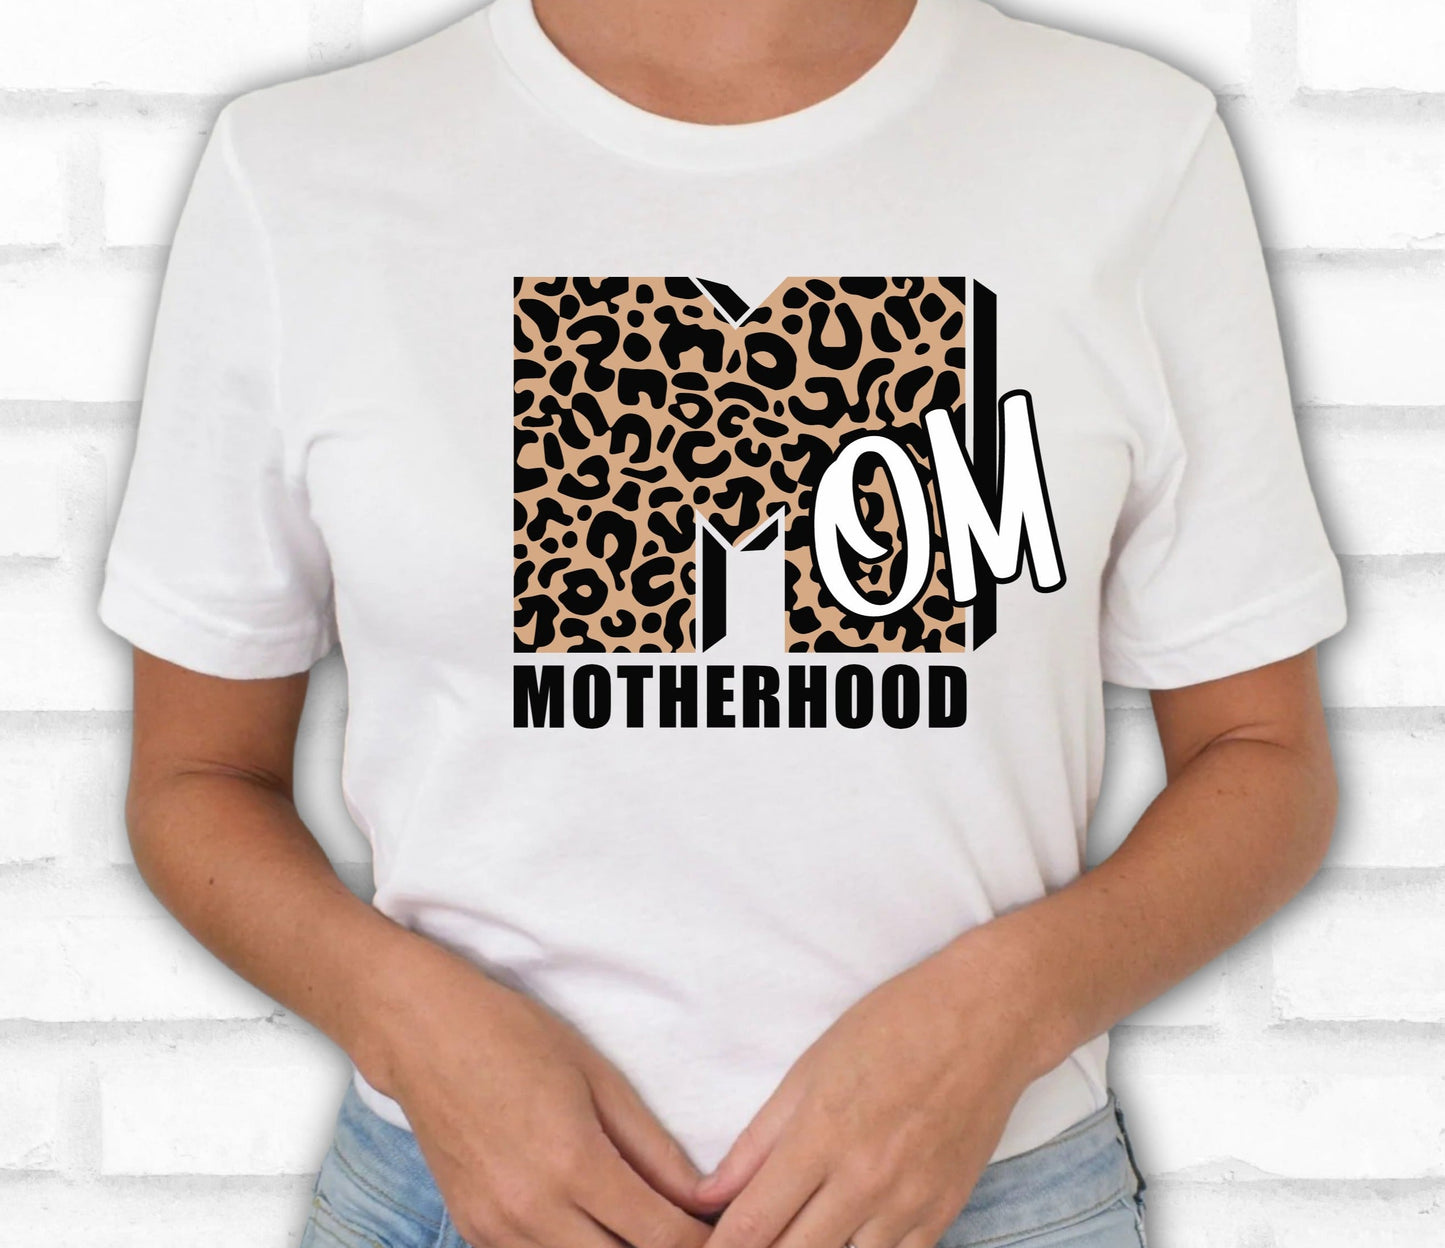 Mom MTV Leopard T-Shirt or Sweatshirt Stylish and Trendy Clothing for Moms